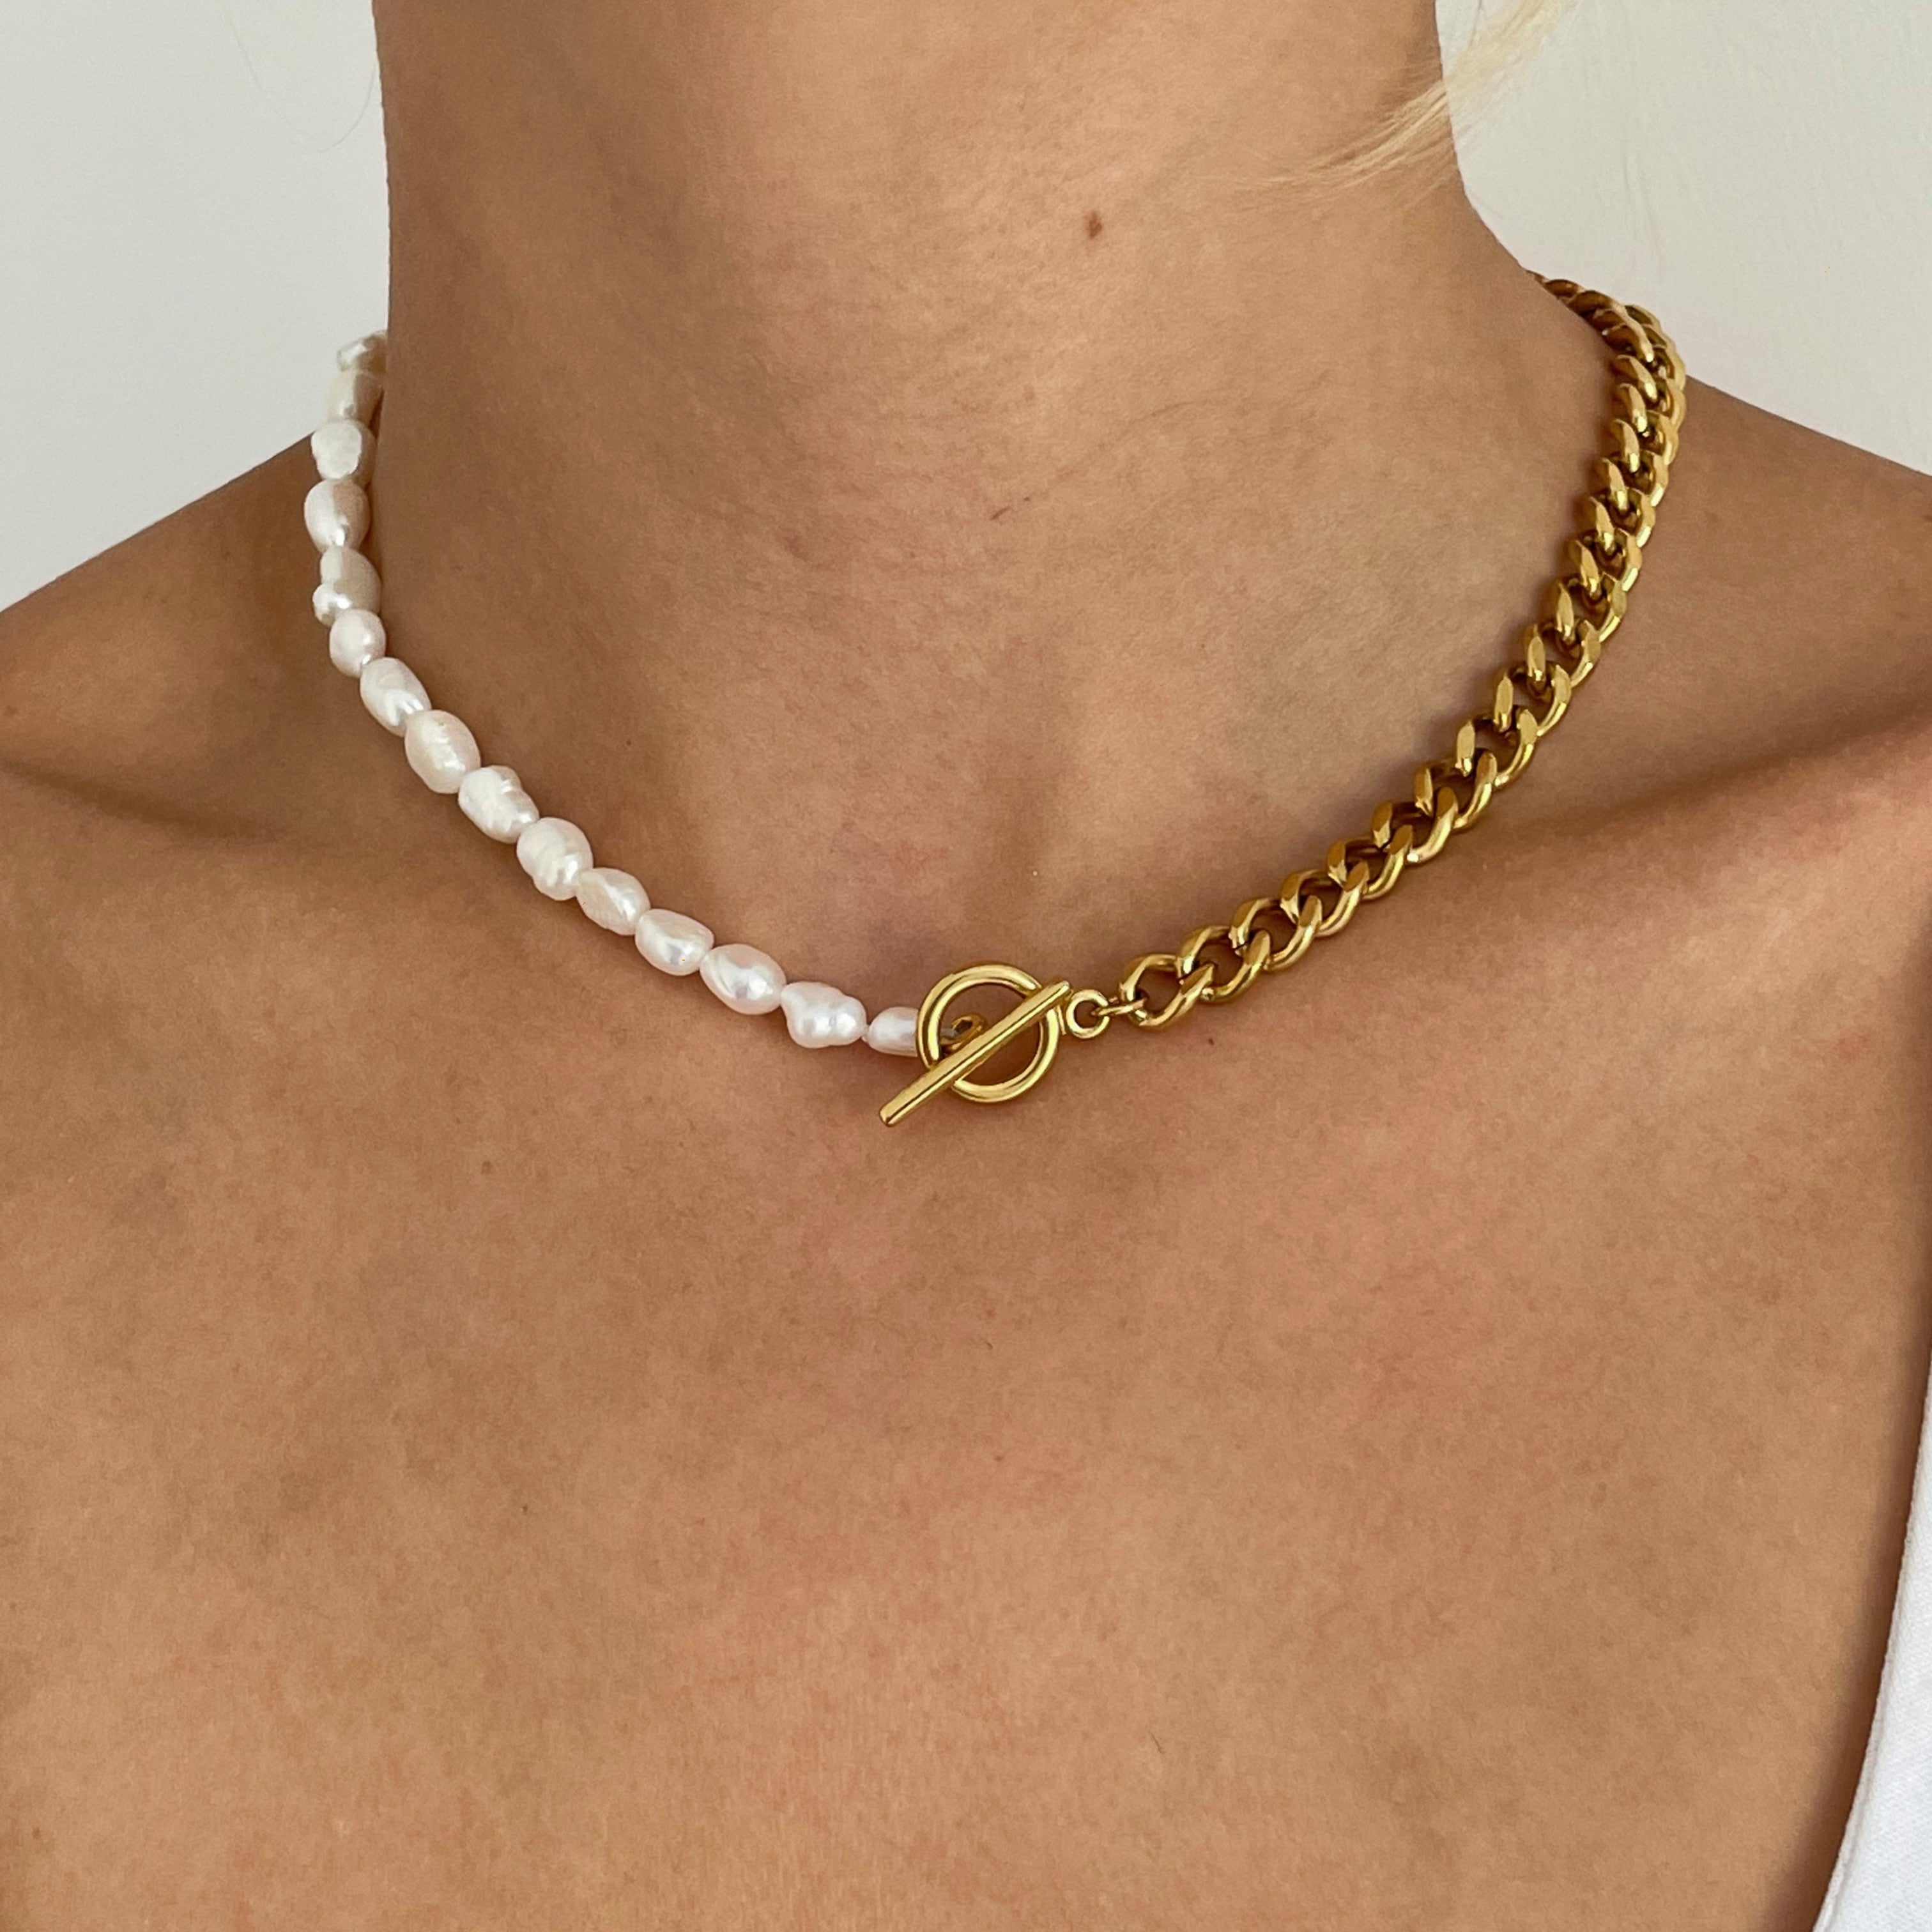 Pearl Chain Necklace: Add a touch of elegance to your ensemble